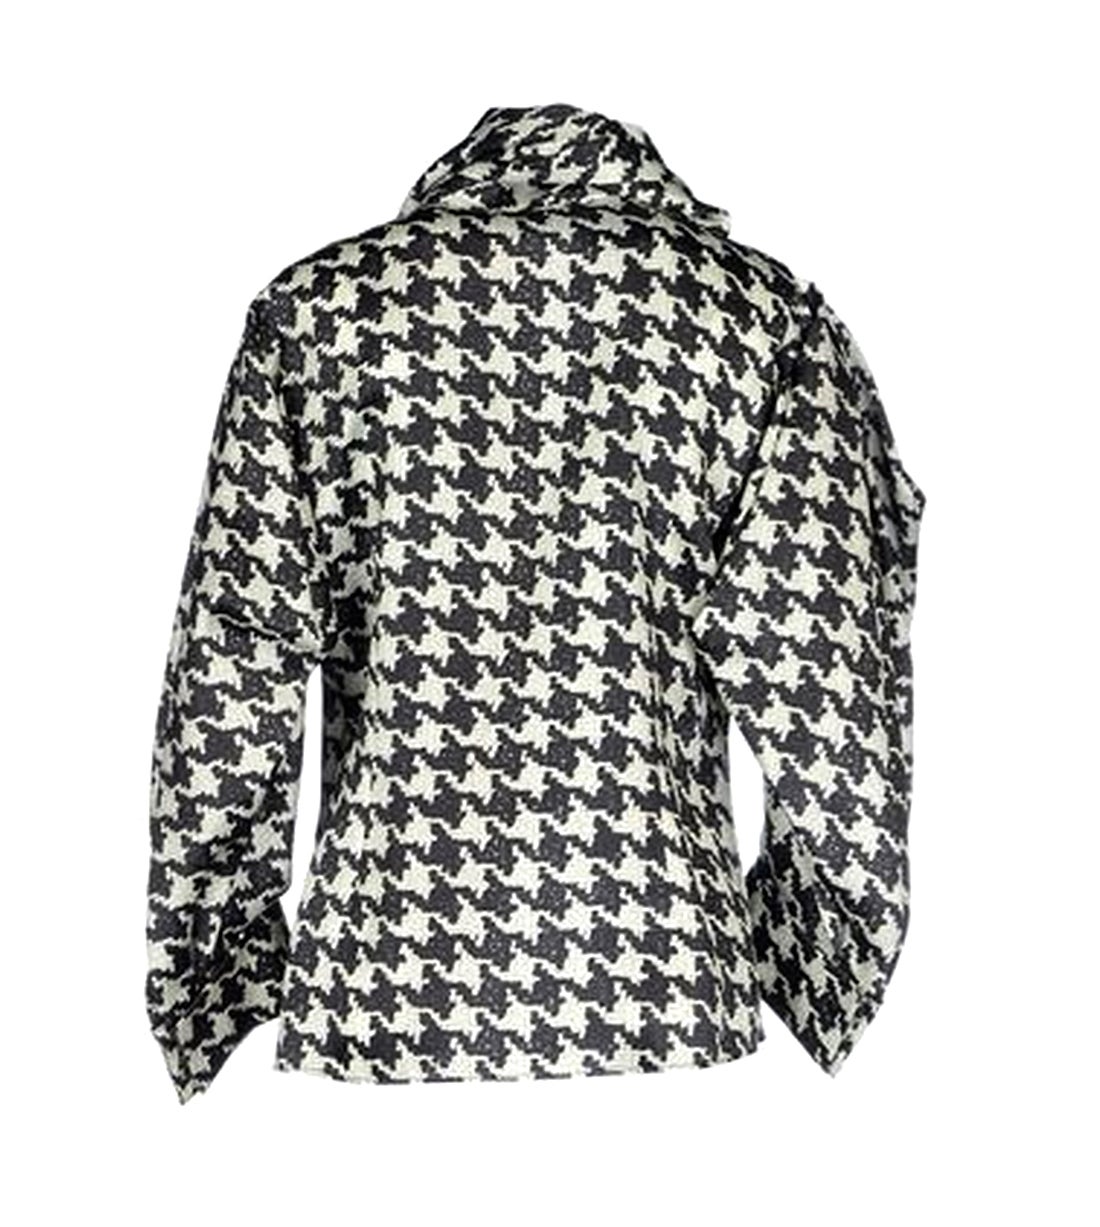 NWT Alexander McQueen blouse from his 2009 Autumn/Winter Collection 